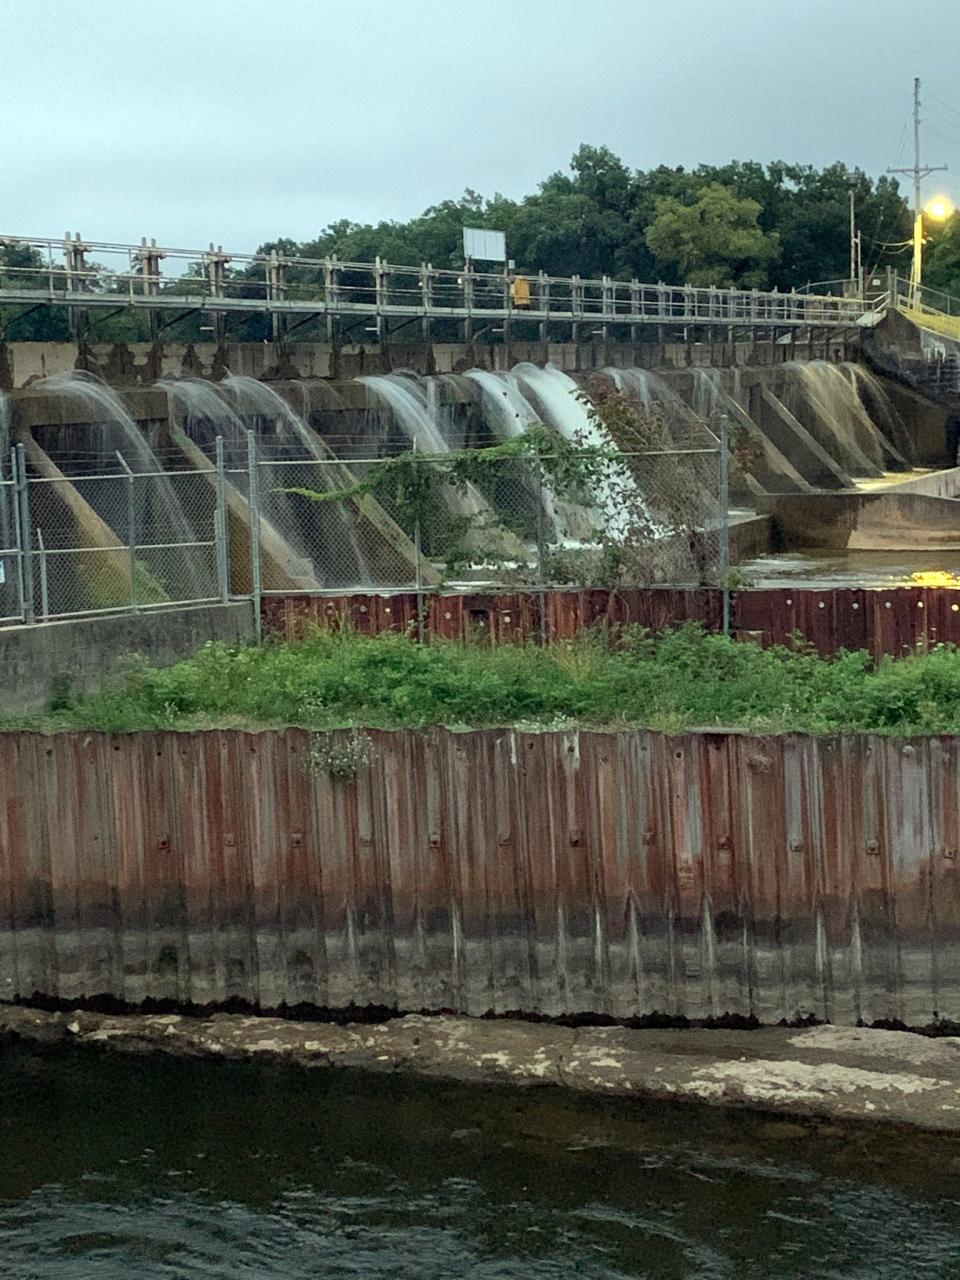 The Sturgis hydroelectric dam is pictured Thursday. The water level near the dam is set to be drawn down starting Sept. 11, to allow for repairs at the nearby Langley Covered Bridge.